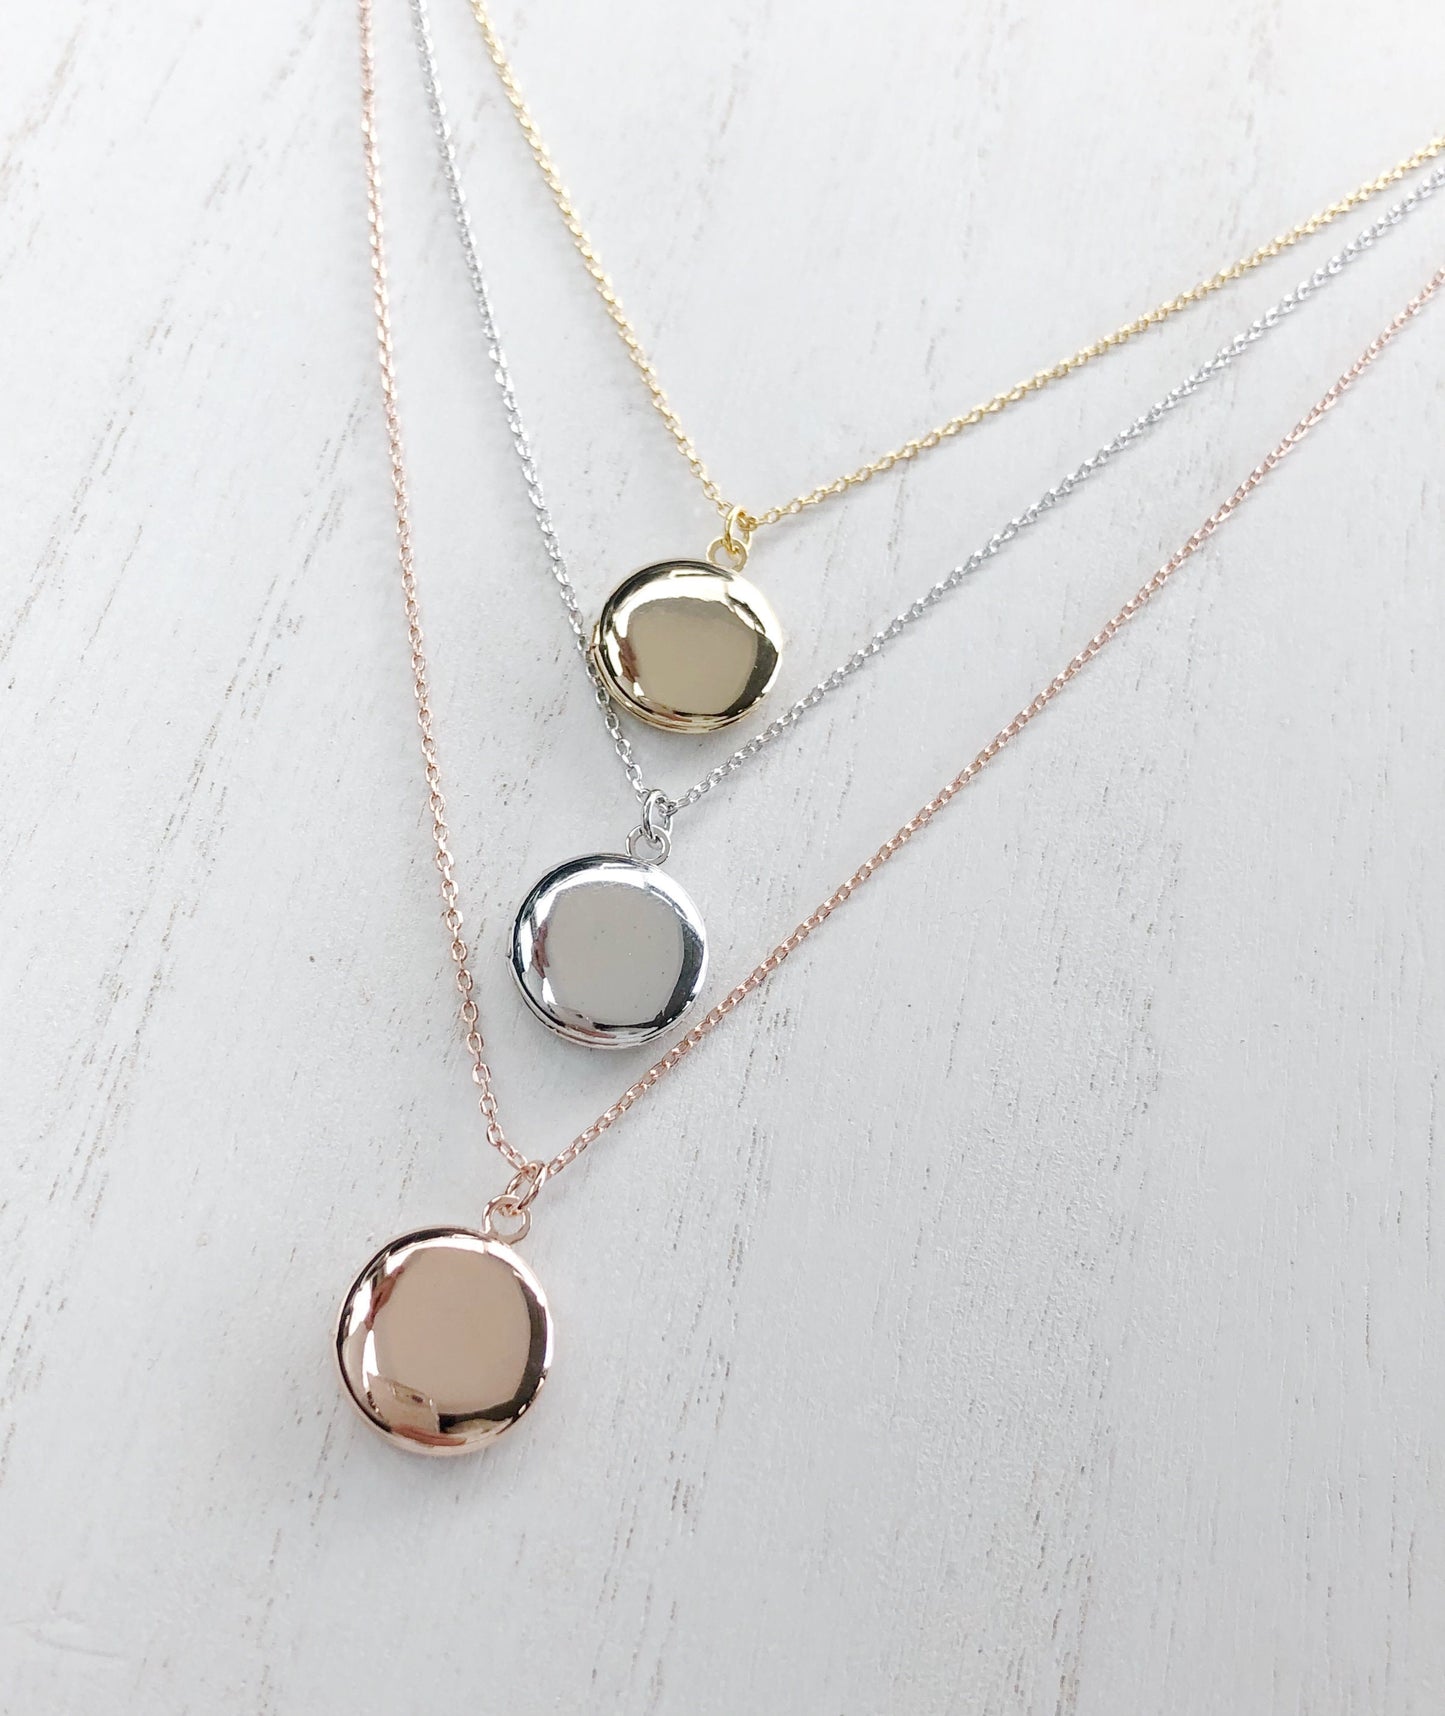 Locket necklace, Round Locket necklace, birthday gift, layering necklace, dainty jewelry, bridesmaid gifts, rose gold, gold, silver, locket